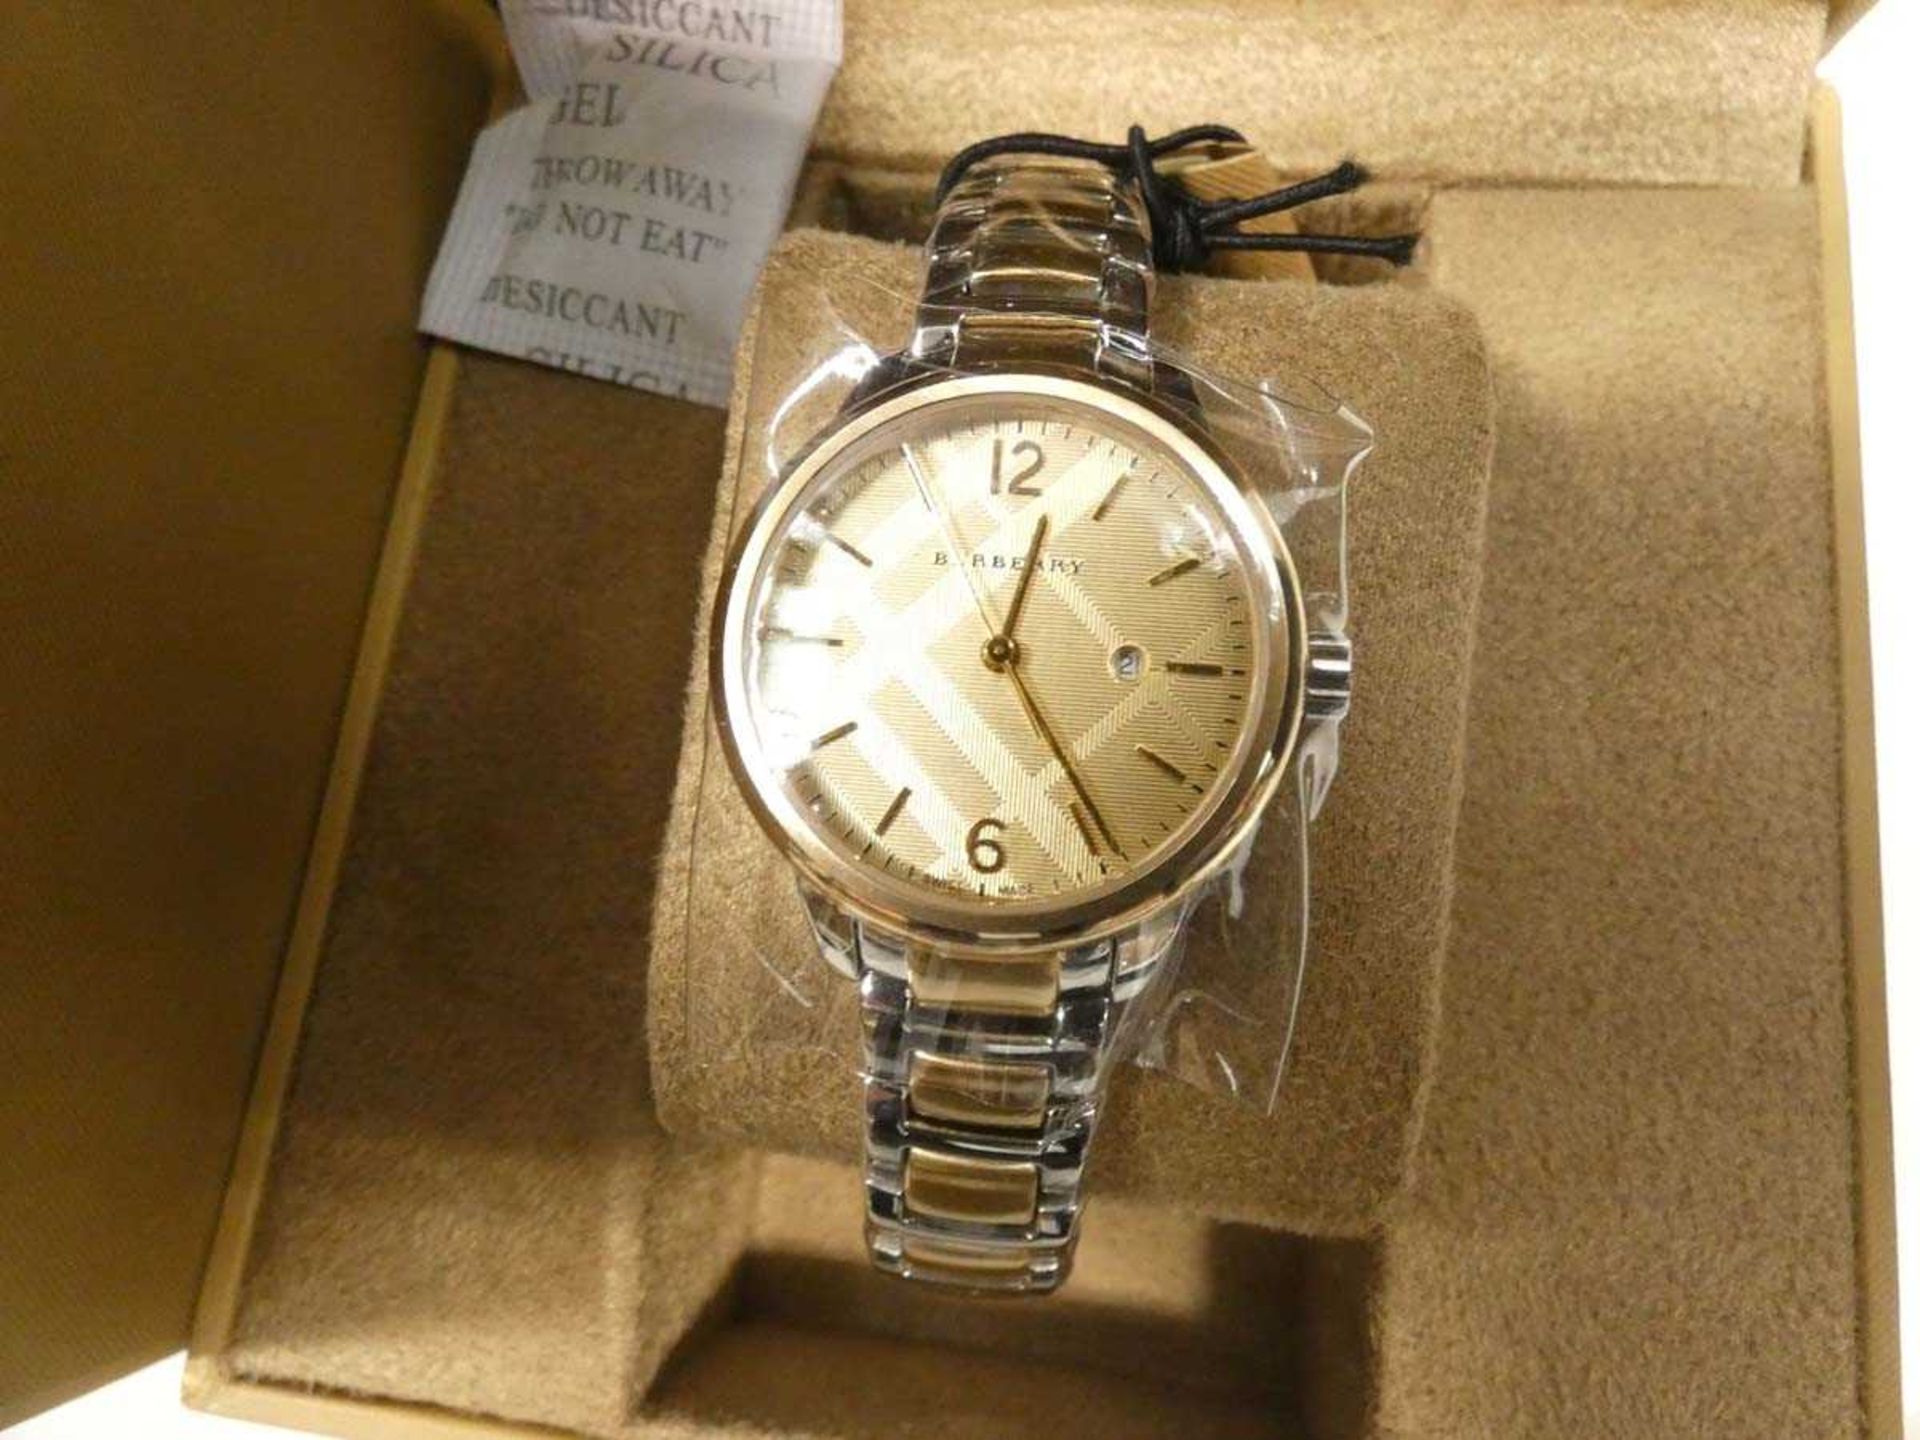 +VAT Burberry BU10118 wristwatch with box, warranty card and booklet - Image 2 of 2